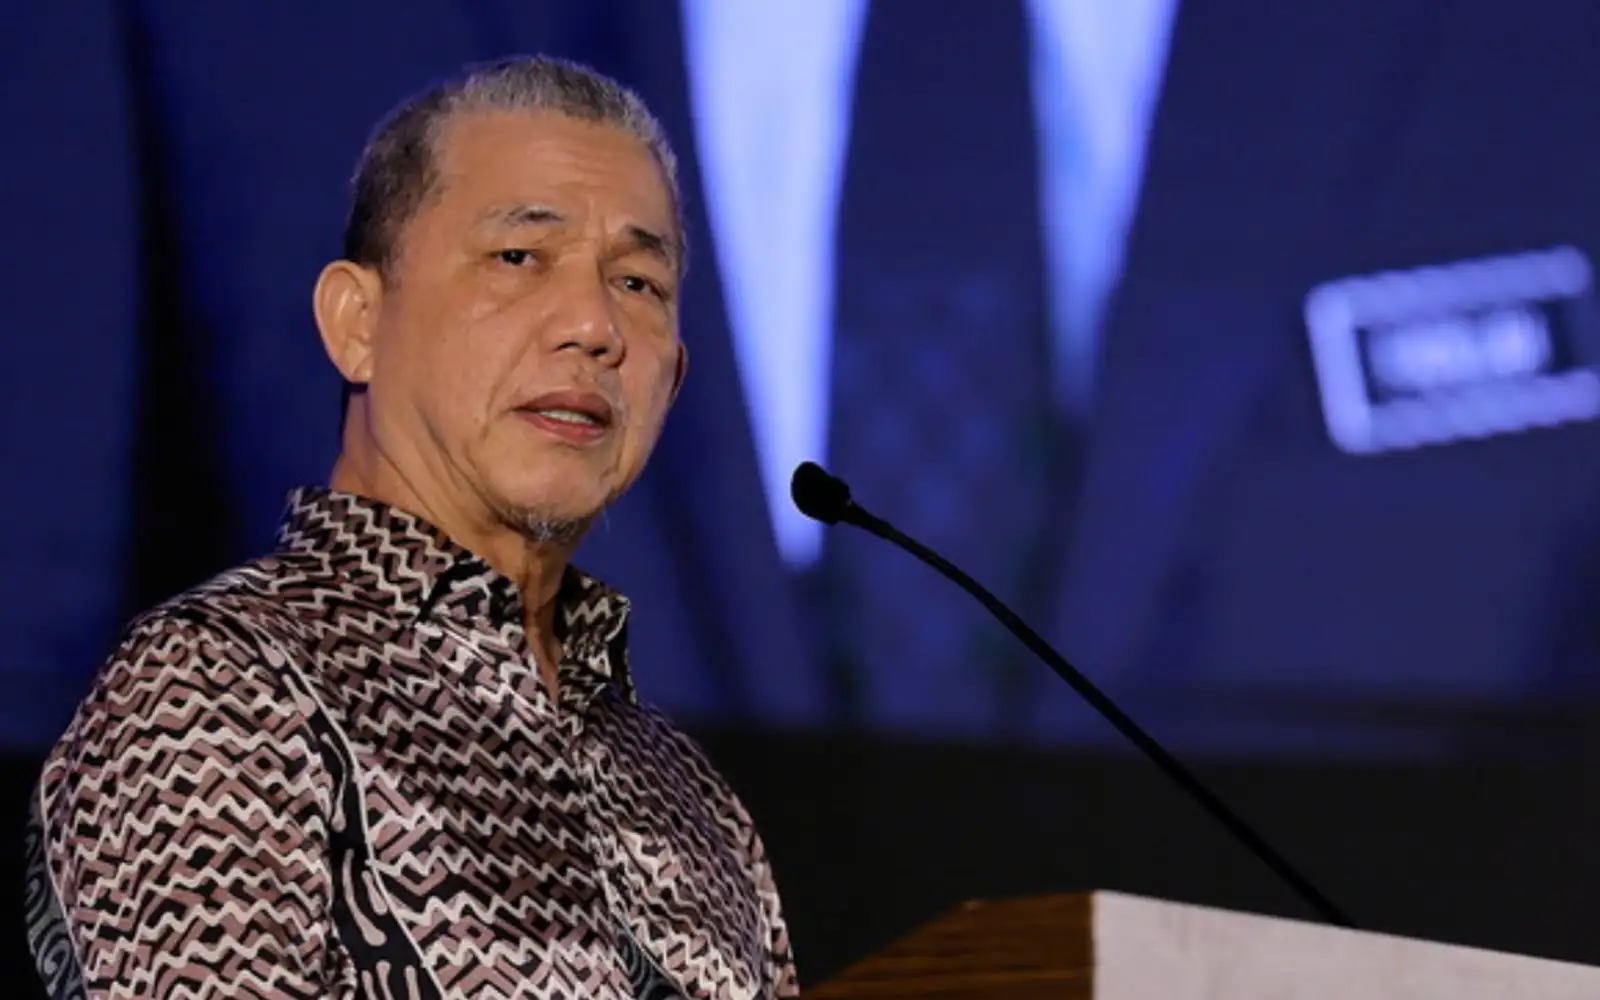 dpm moots rm2mil deposit for businessmen to move to sarawak